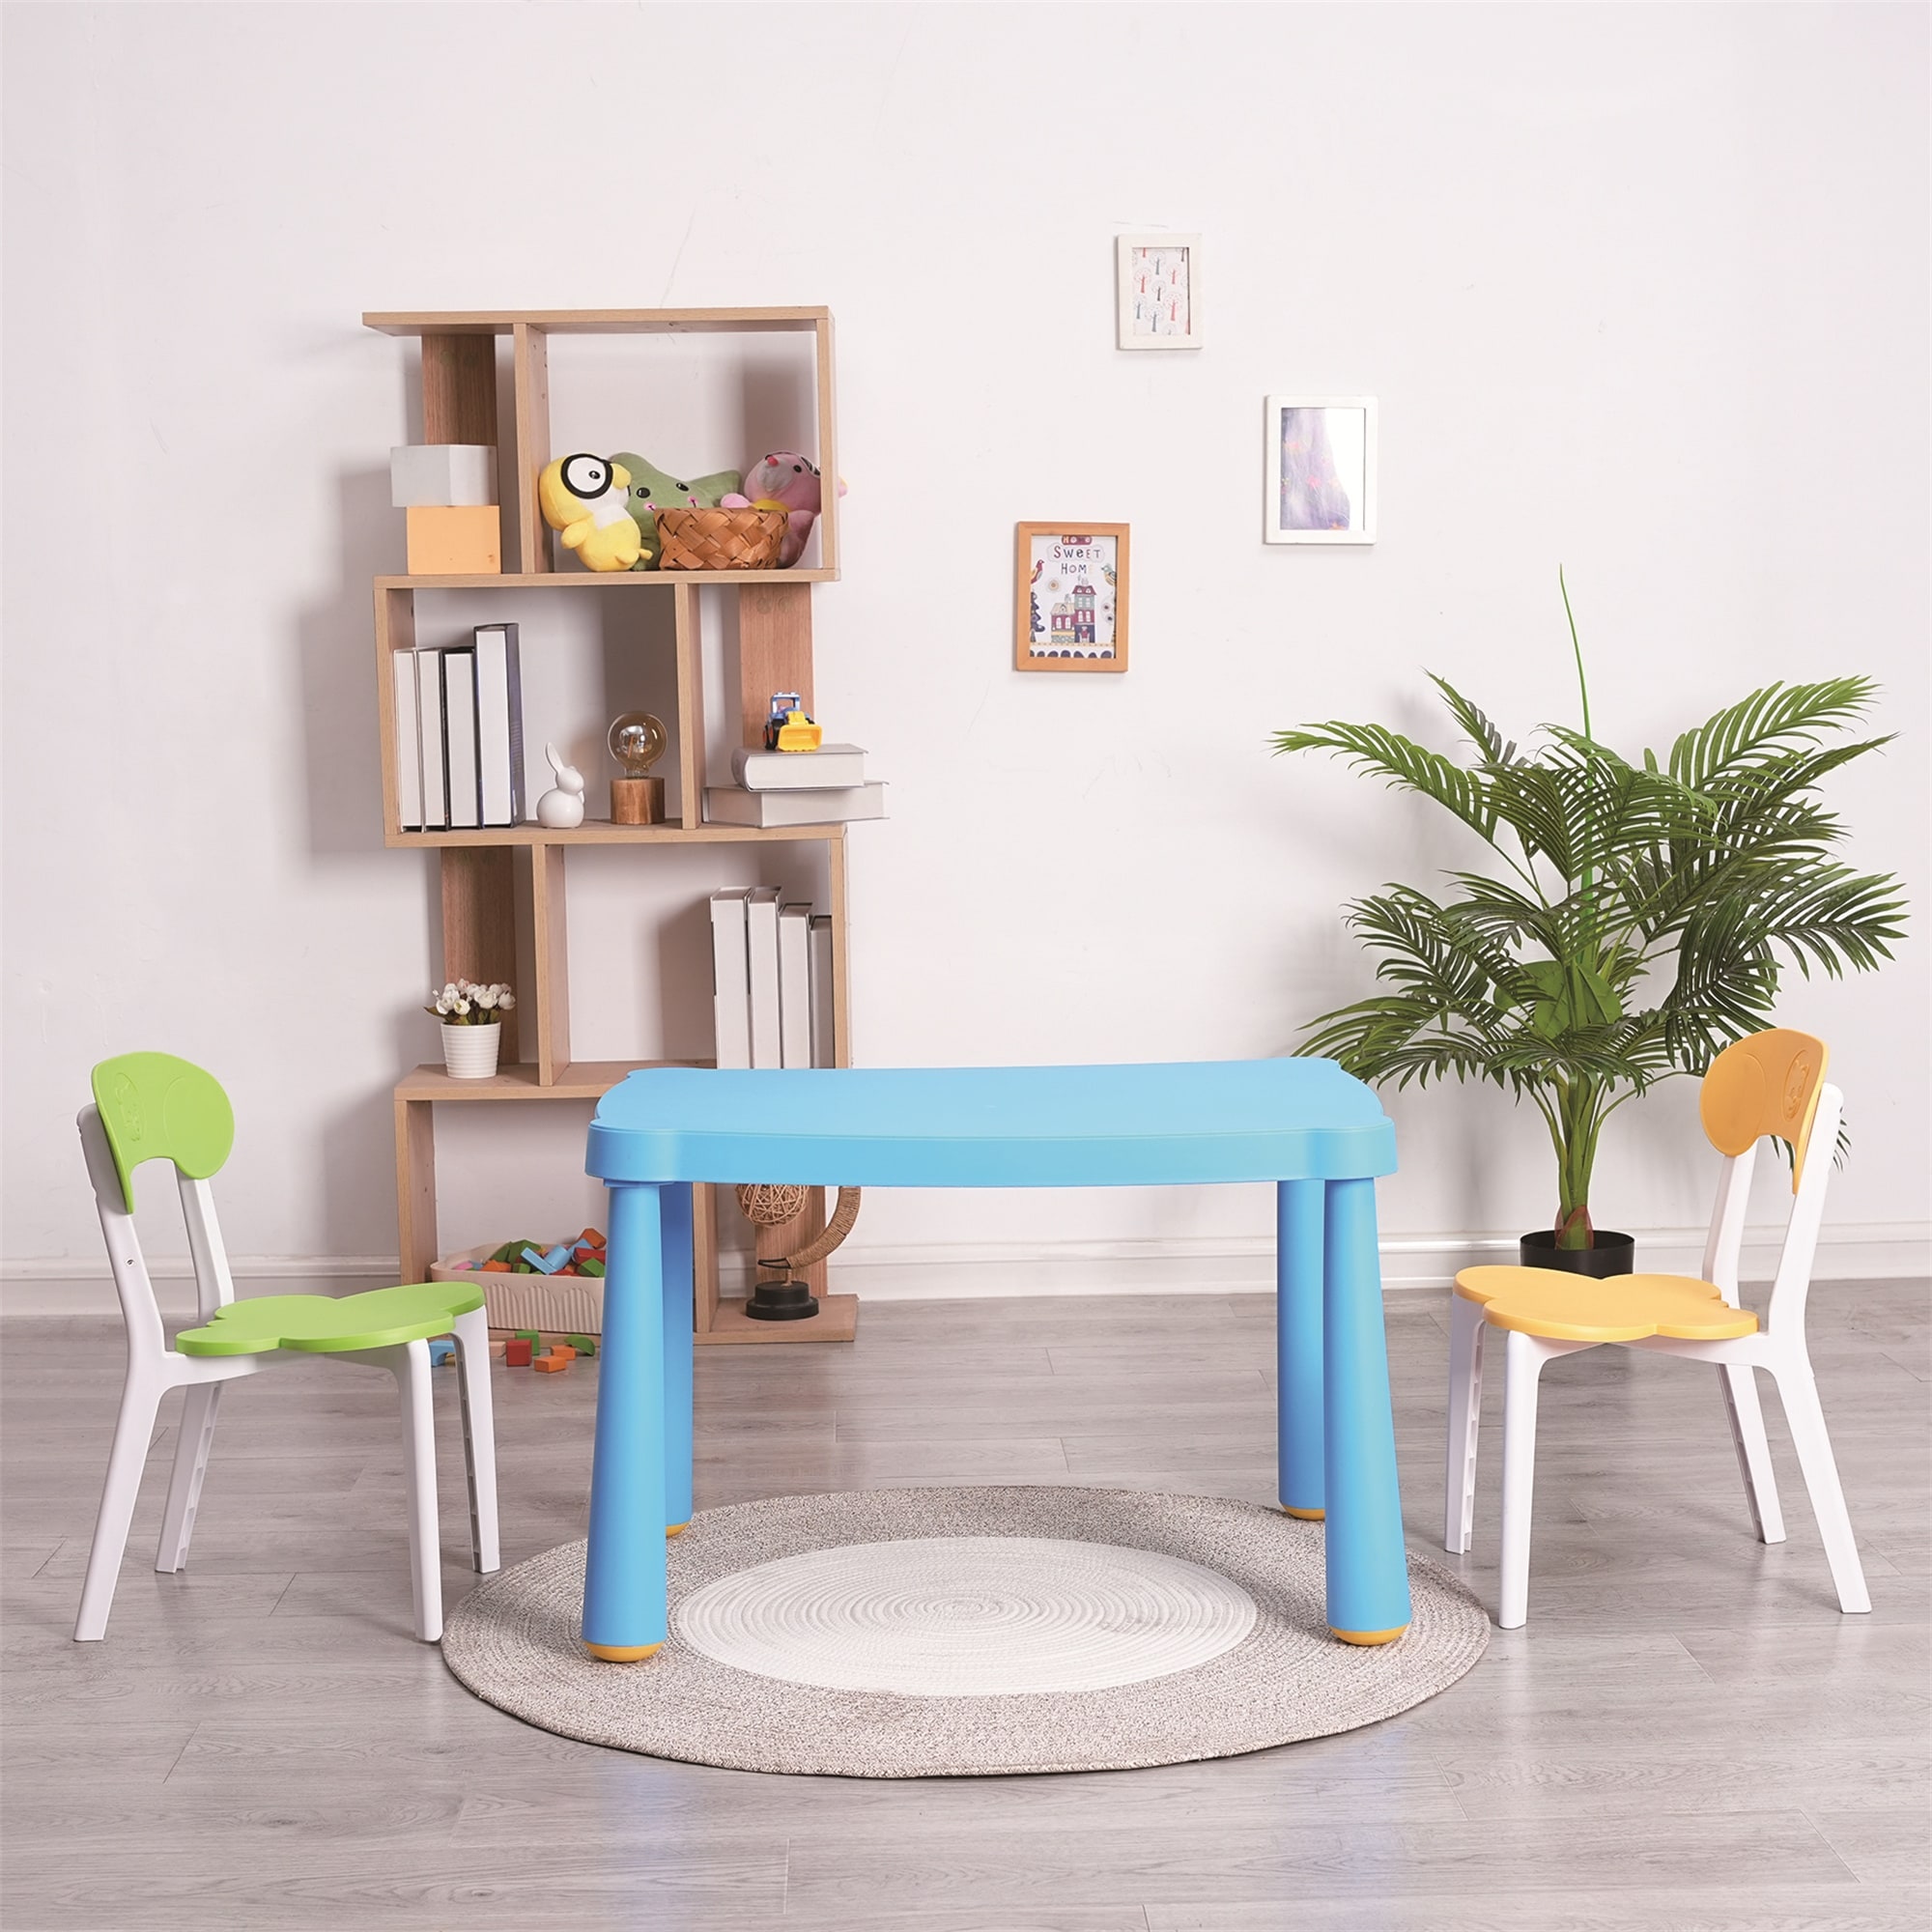 https://ak1.ostkcdn.com/images/products/is/images/direct/eb1795f7f71c521e42fd13bc0a96595b920b254e/Kids-Table-and-Chair-Set%2C3-Piece-Toddler-Table-and-Chair-Set%2CPlastic-Children-Activity-Tablefor-Reading%2CPreschool%2CDrawing.jpg